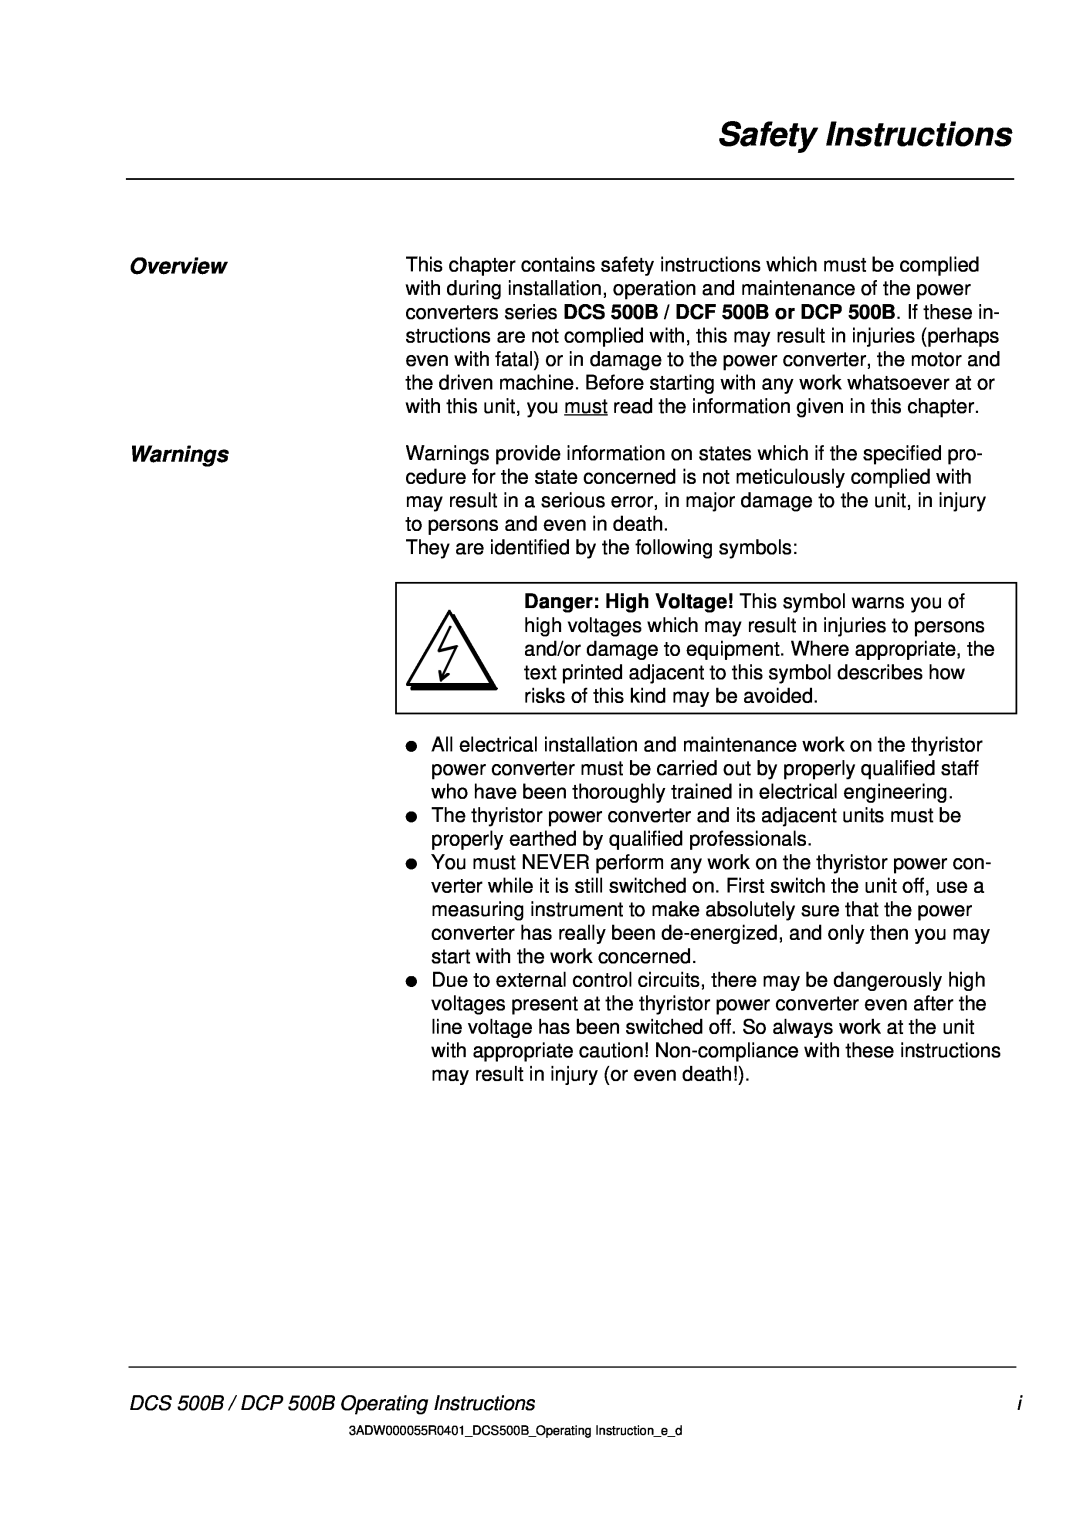 DCS manual Safety Instructions, Overview, Warnings, DCS 500B / DCP 500B Operating Instructions 